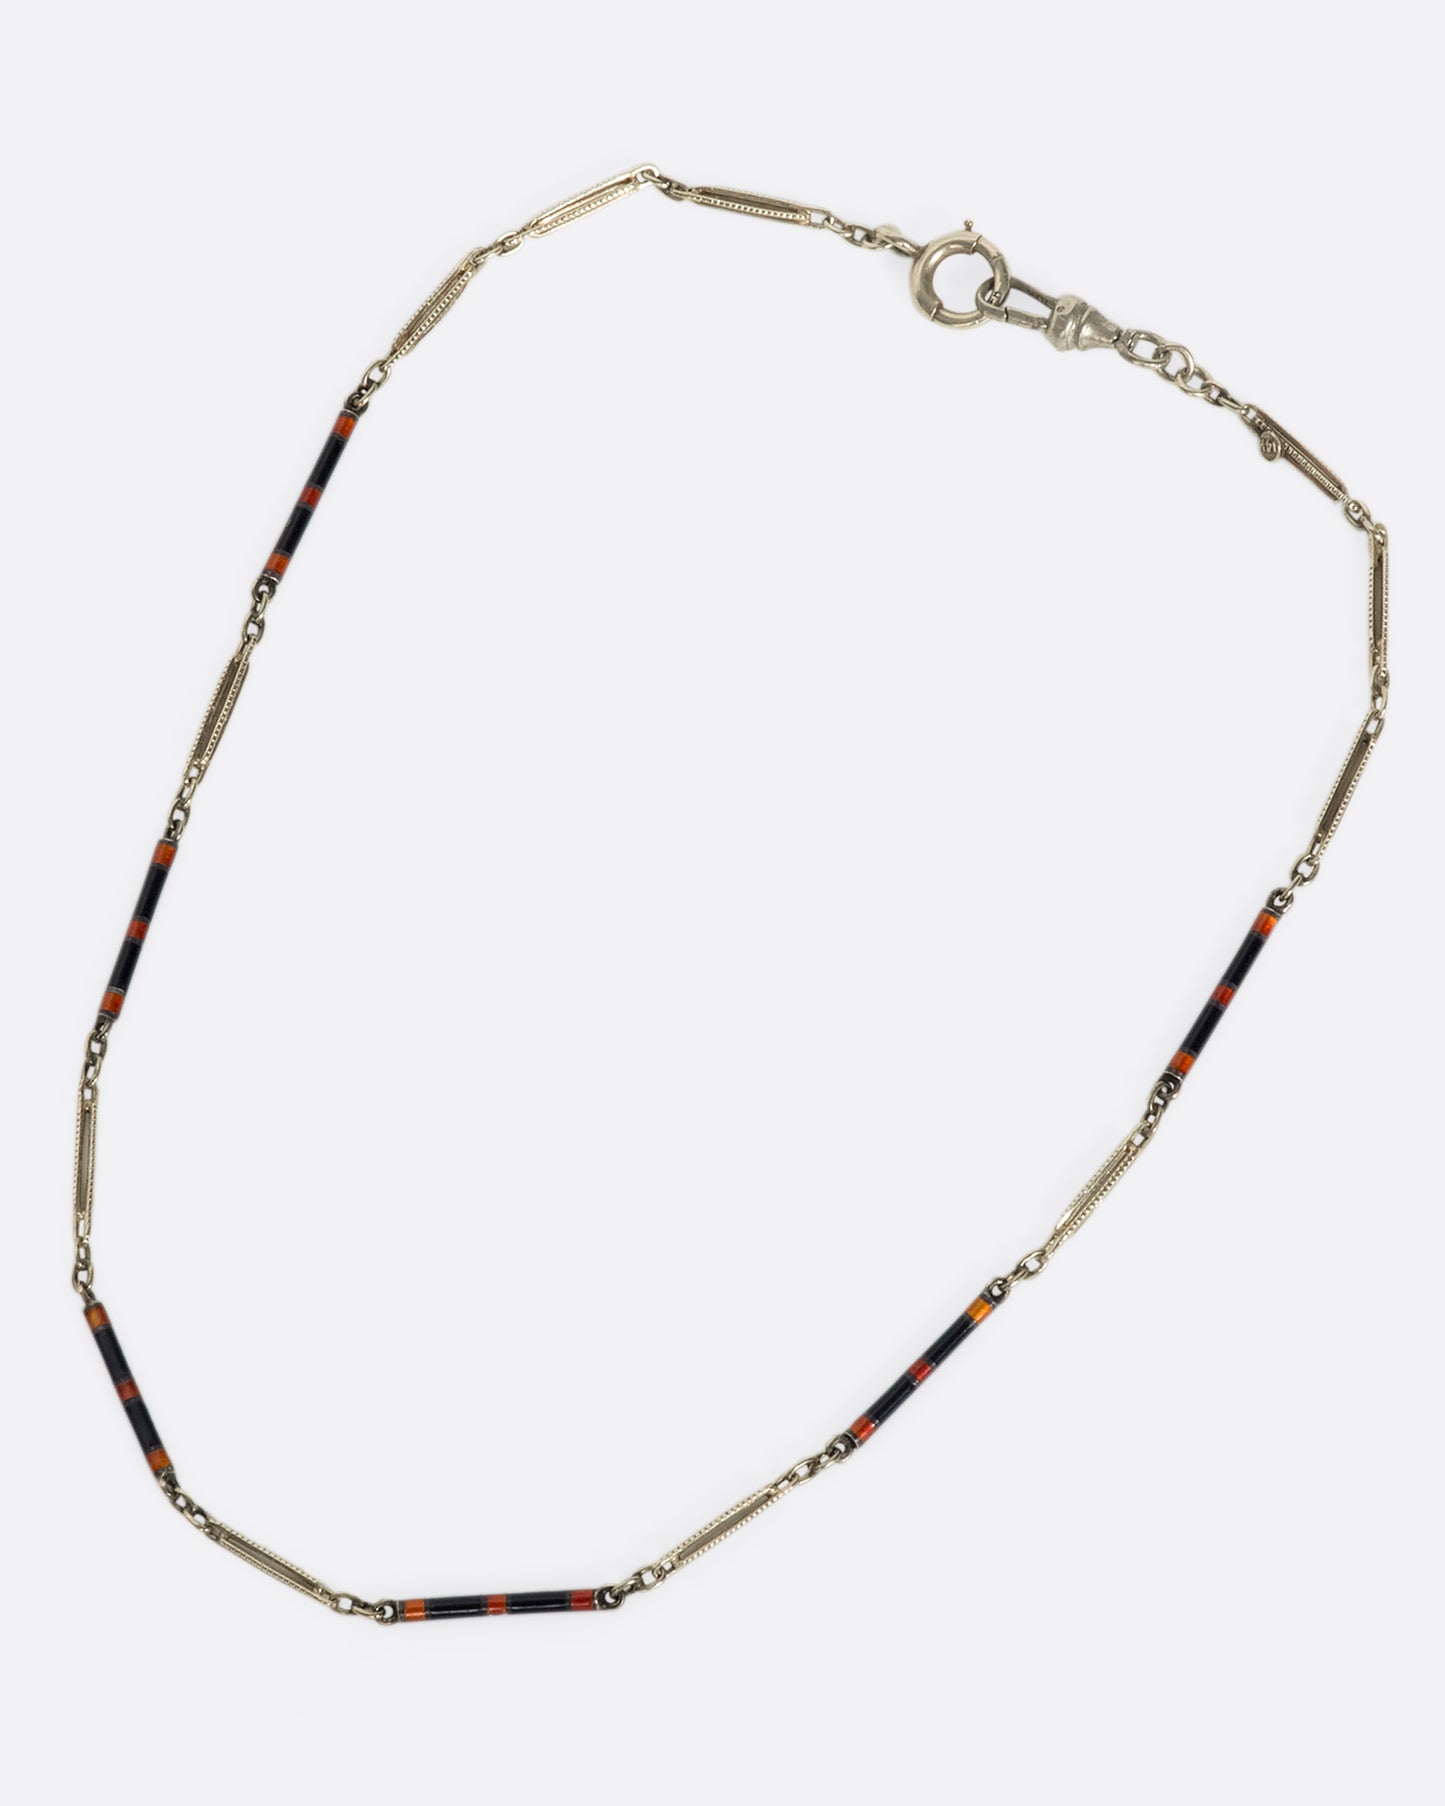 An overhead view of a white gold chain necklace with black and red enamel sections laying down flat.